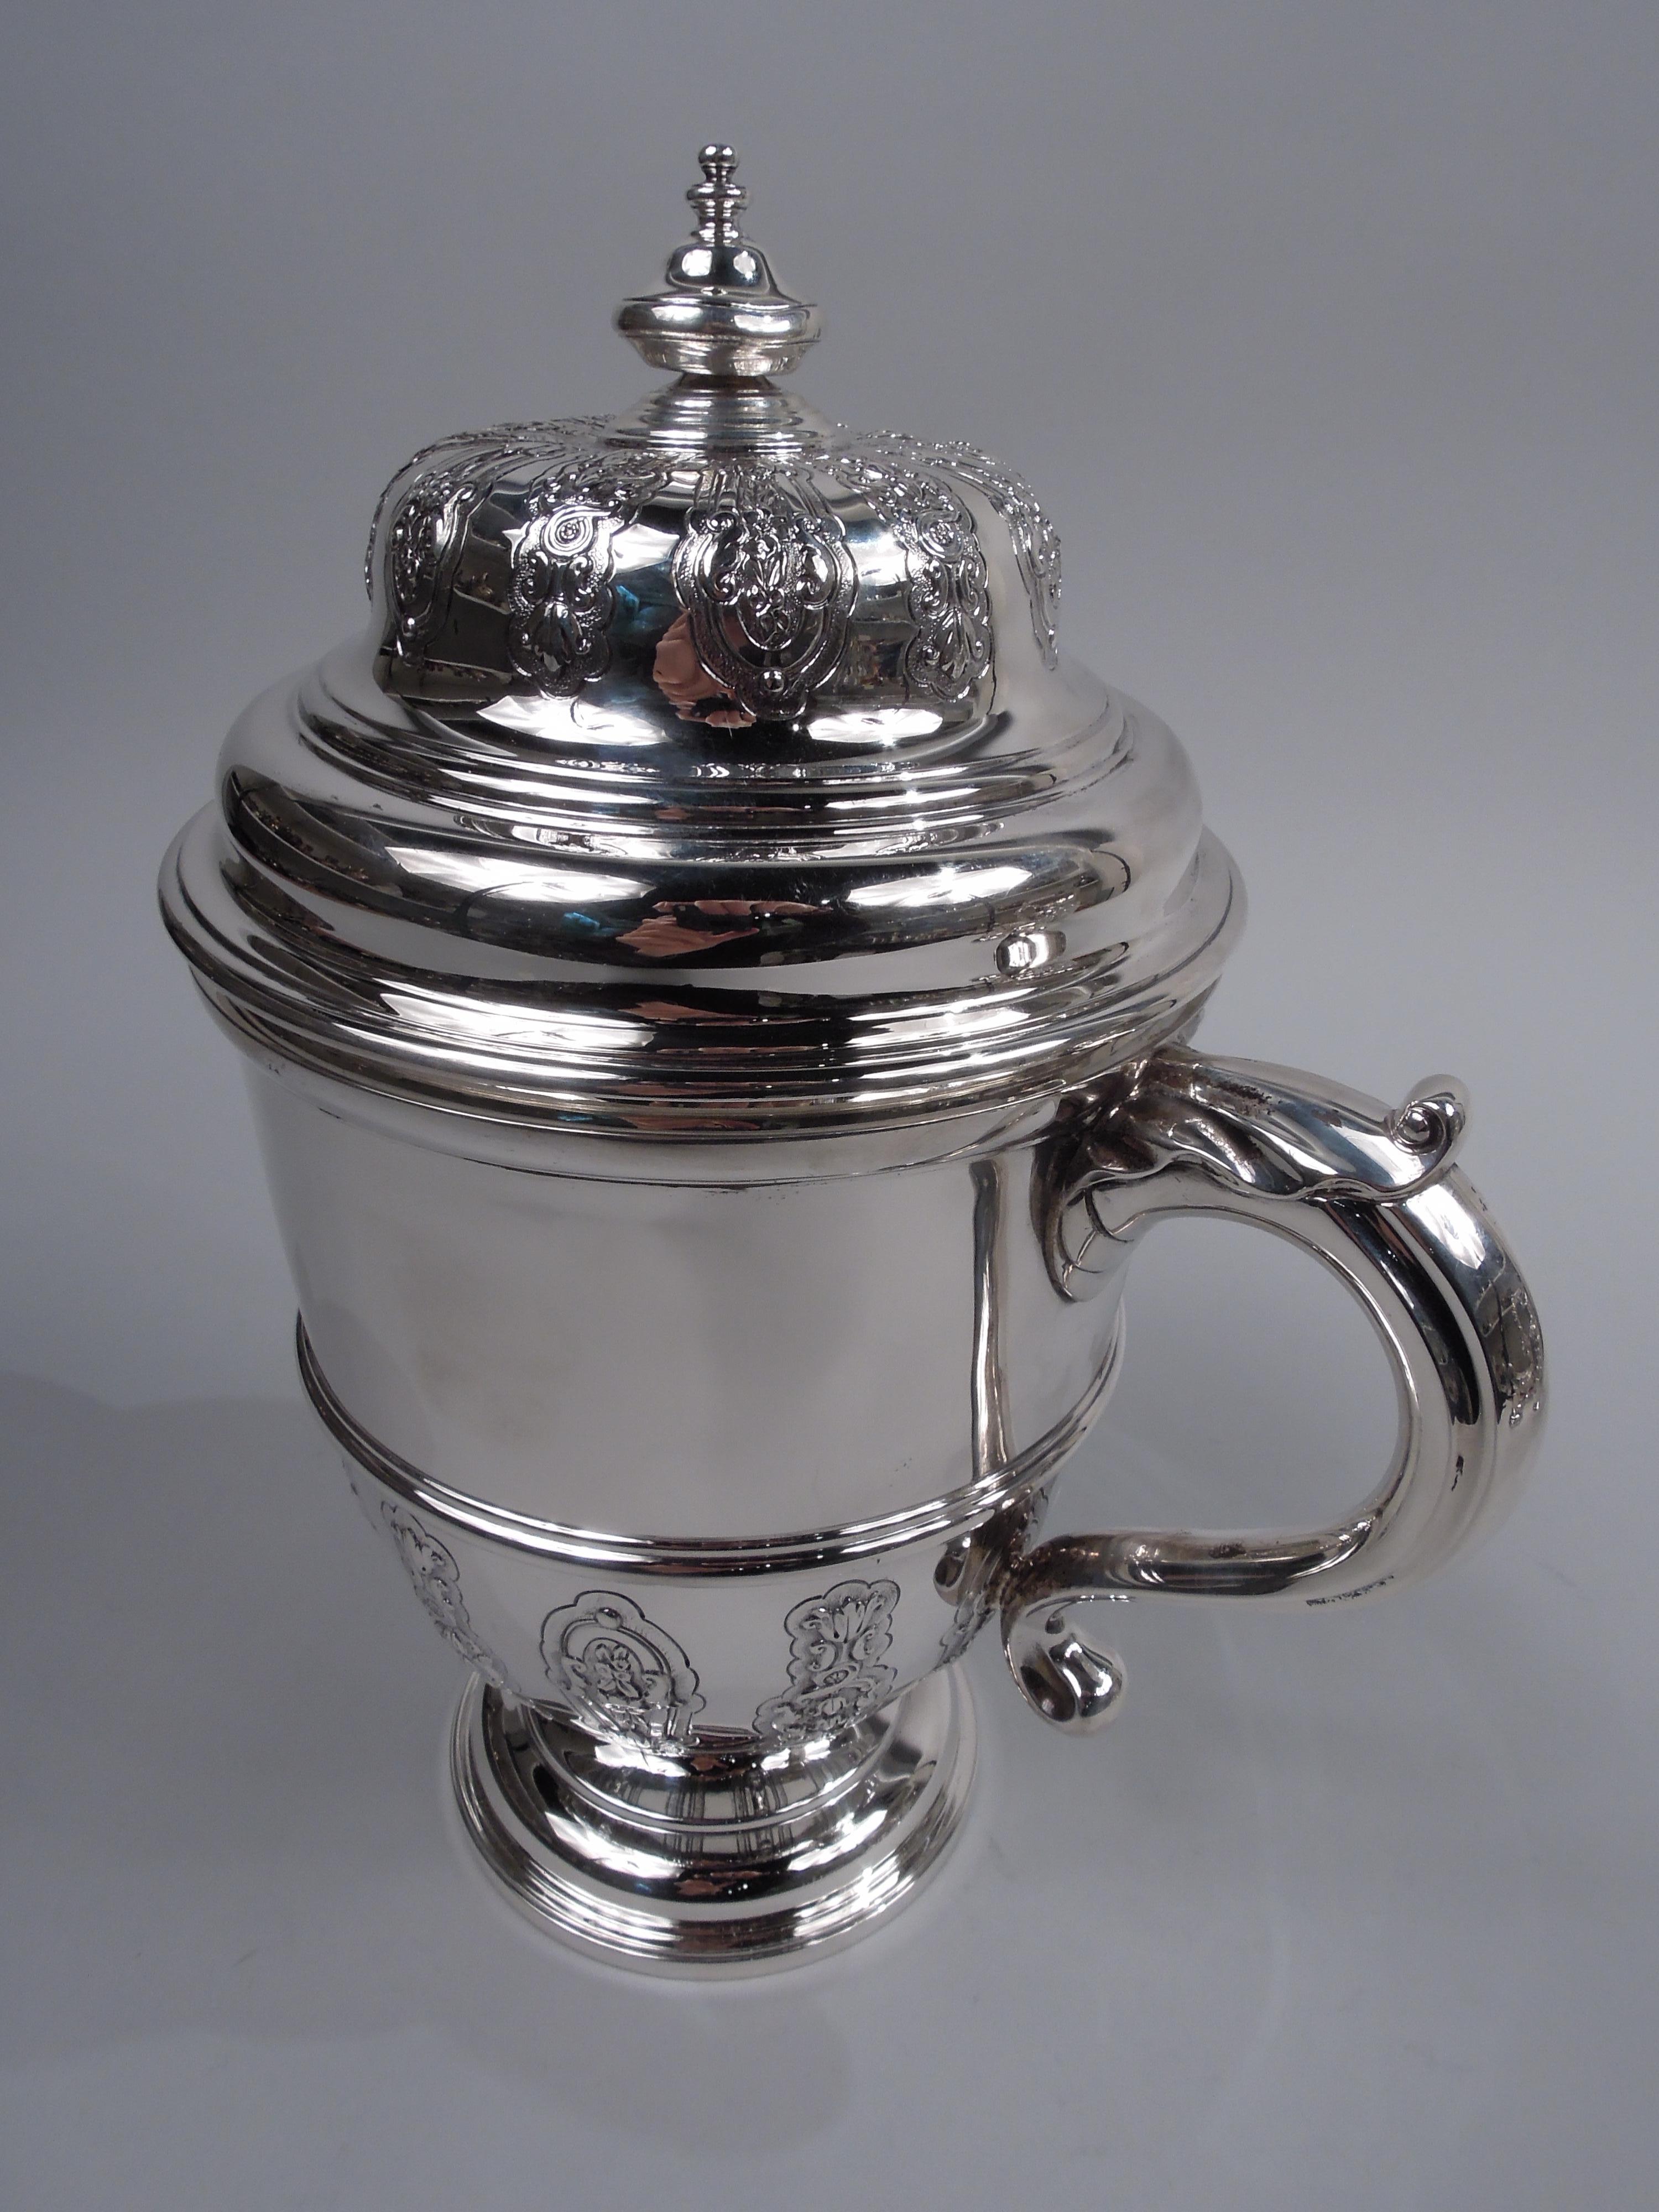 George V sterling silver covered urn. Made by Lionel Alfred Chrichton in London in 1916. Girdled urn with half strapwork on stepped domed foot; leaf-capped s-scroll sides handles. Cover double domed with vasiform finial and radiating strapwork.